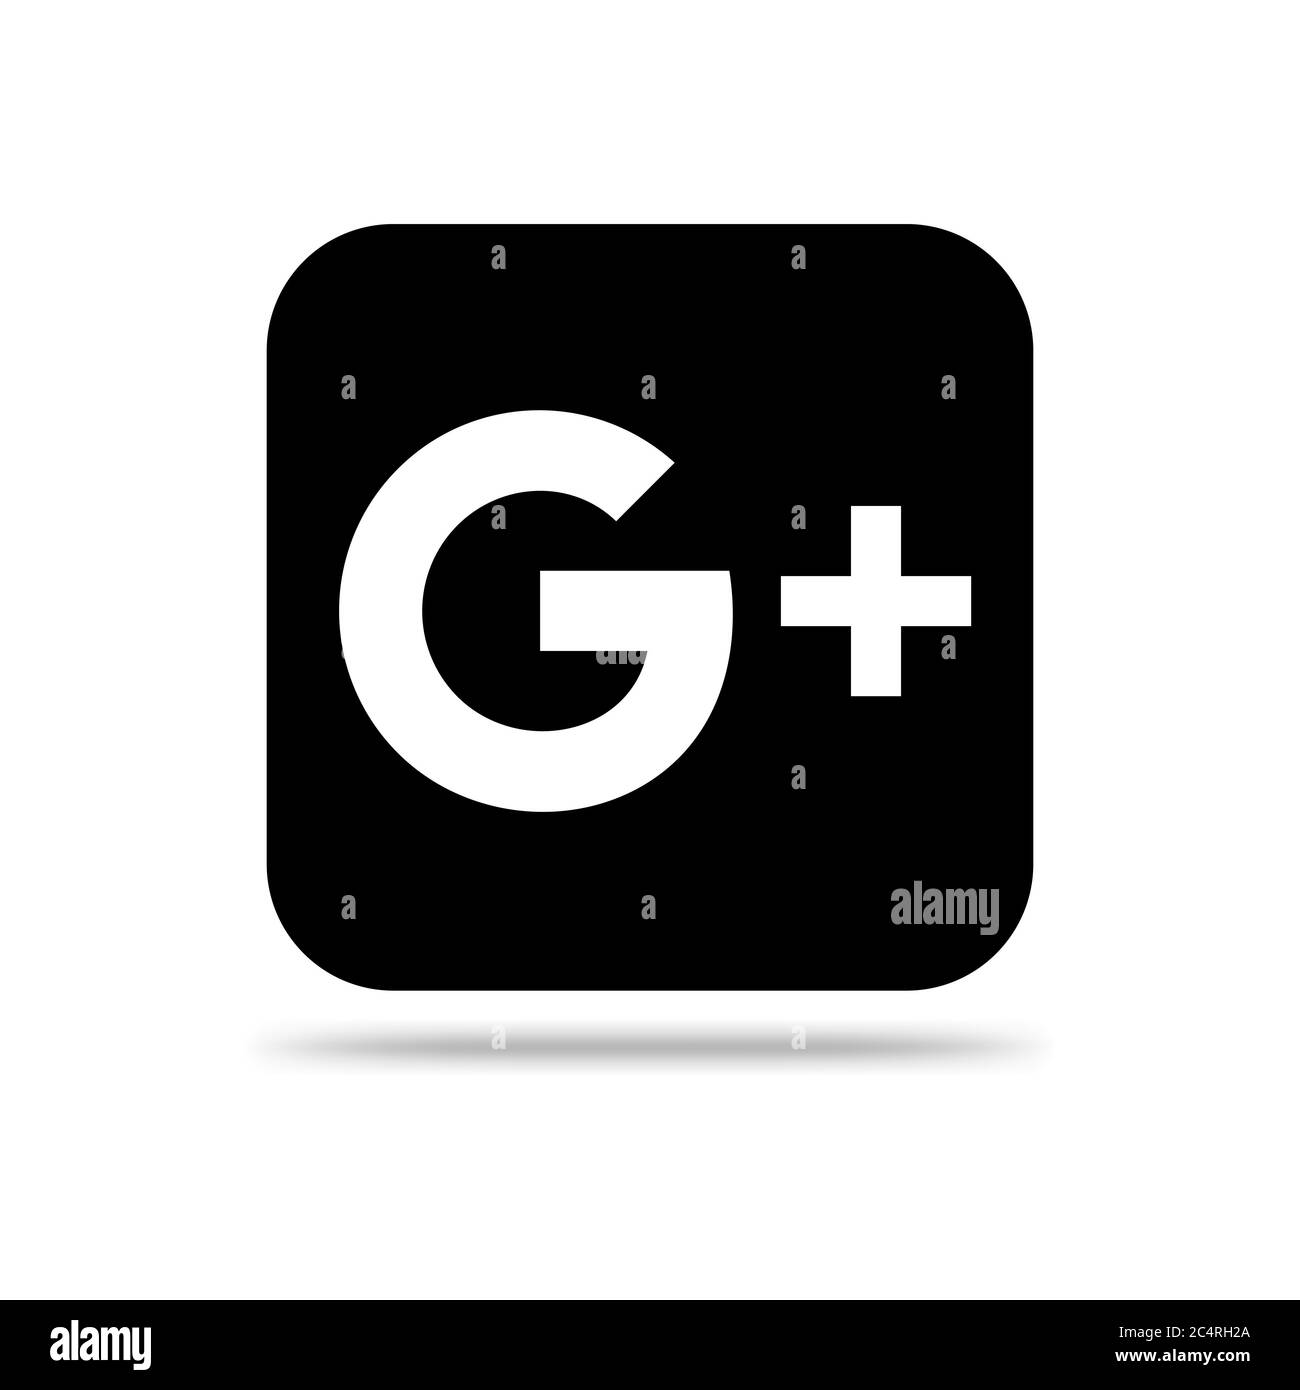 VORONEZH, RUSSIA - JANUARY 31, 2020: Google Plus logo black square icon with shadow Stock Vector